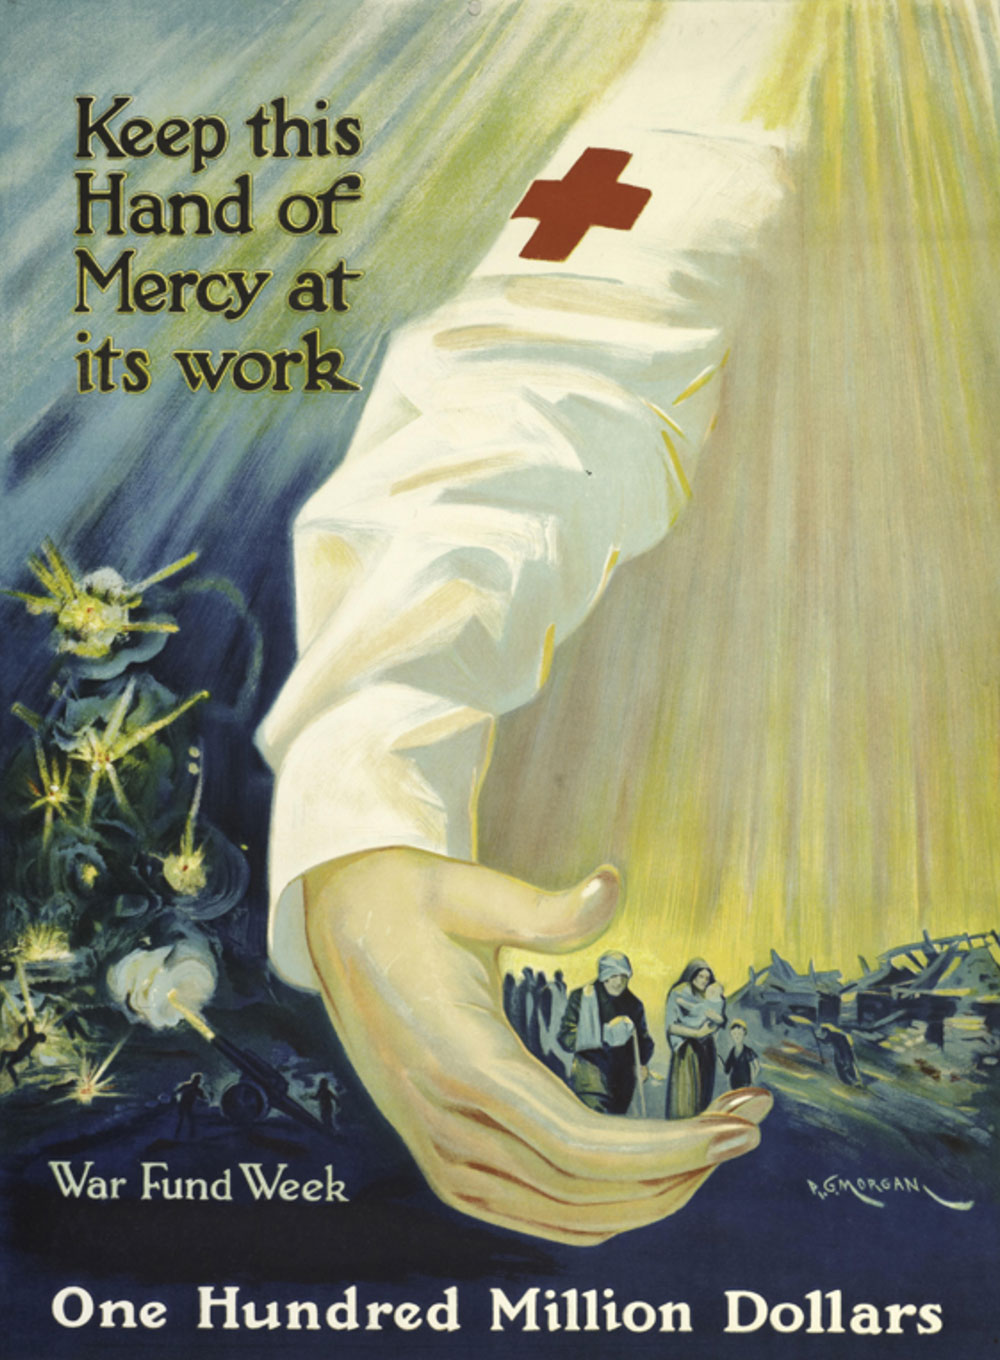 Red Cross fundraising poster